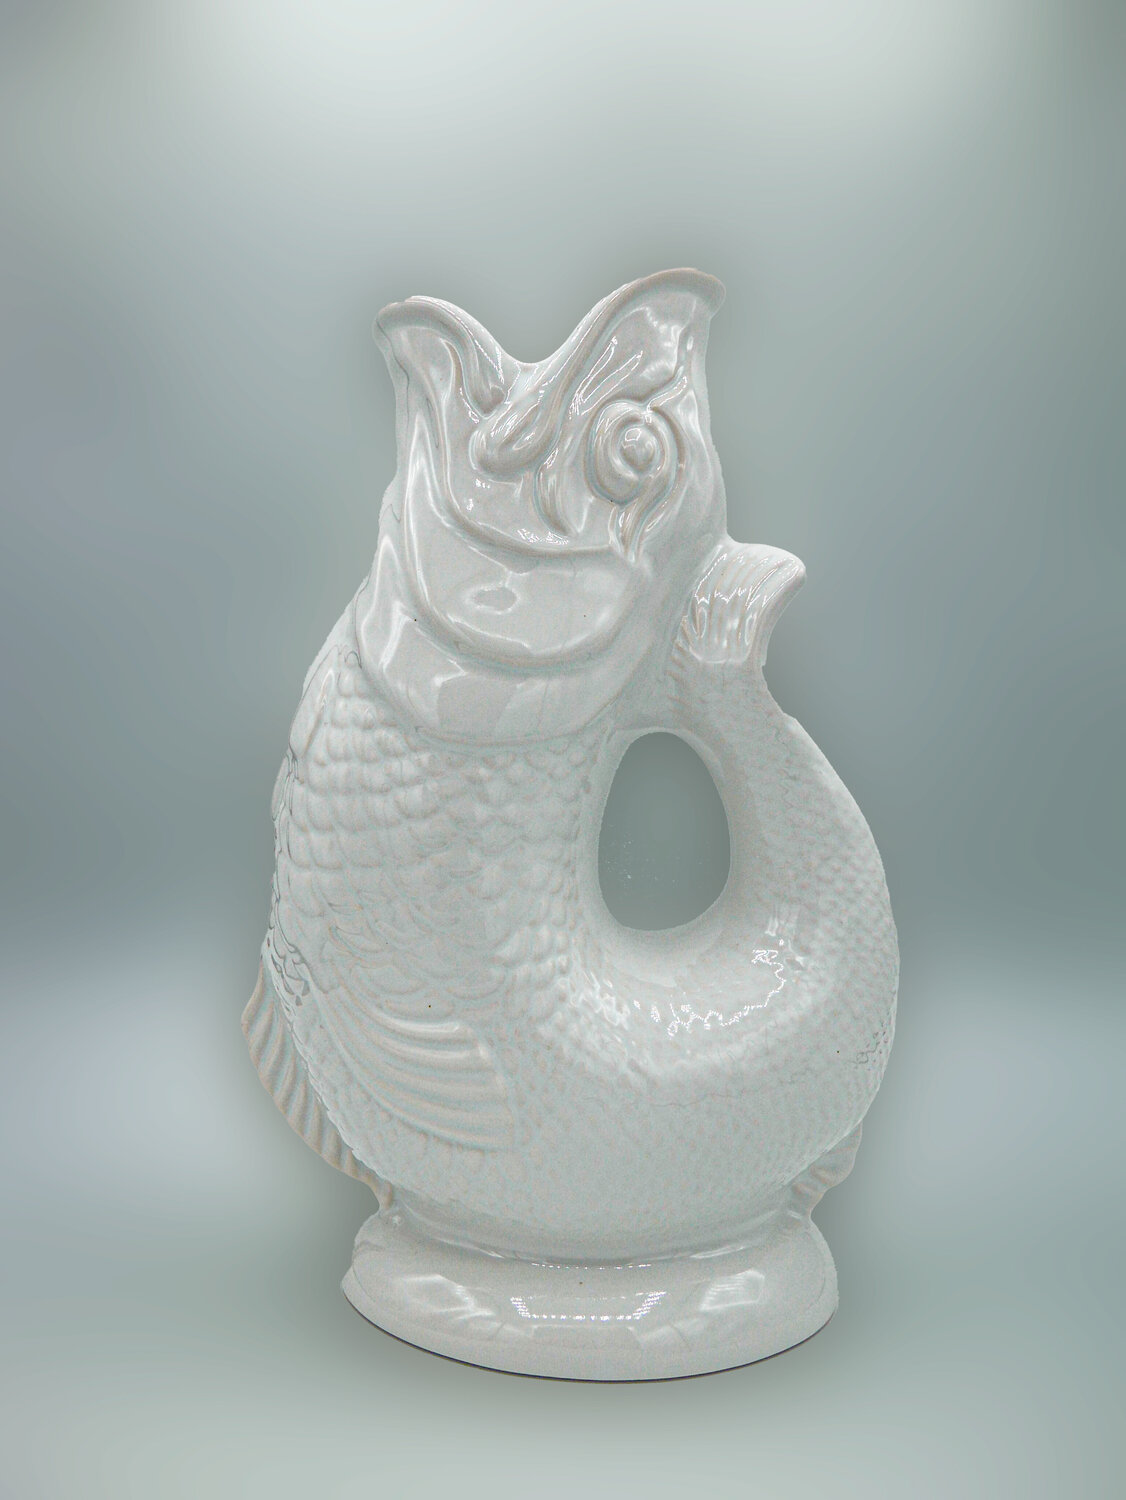 The “Gurgling Cod” pitcher is a classic that gets its name from the “glugging” sound made while pouring water, a happy byproduct of the curvature of the jug’s design.  For years, gurgling cod pitchers were only available at Shreve Crump &amp; Low on Boylston Street (now on Newbury Street).  Now they are more widely available.  This one, at Lulu’s Pantry in Rockport, is based on an early English design and it’s a steal at $56.  Gurgle away! 